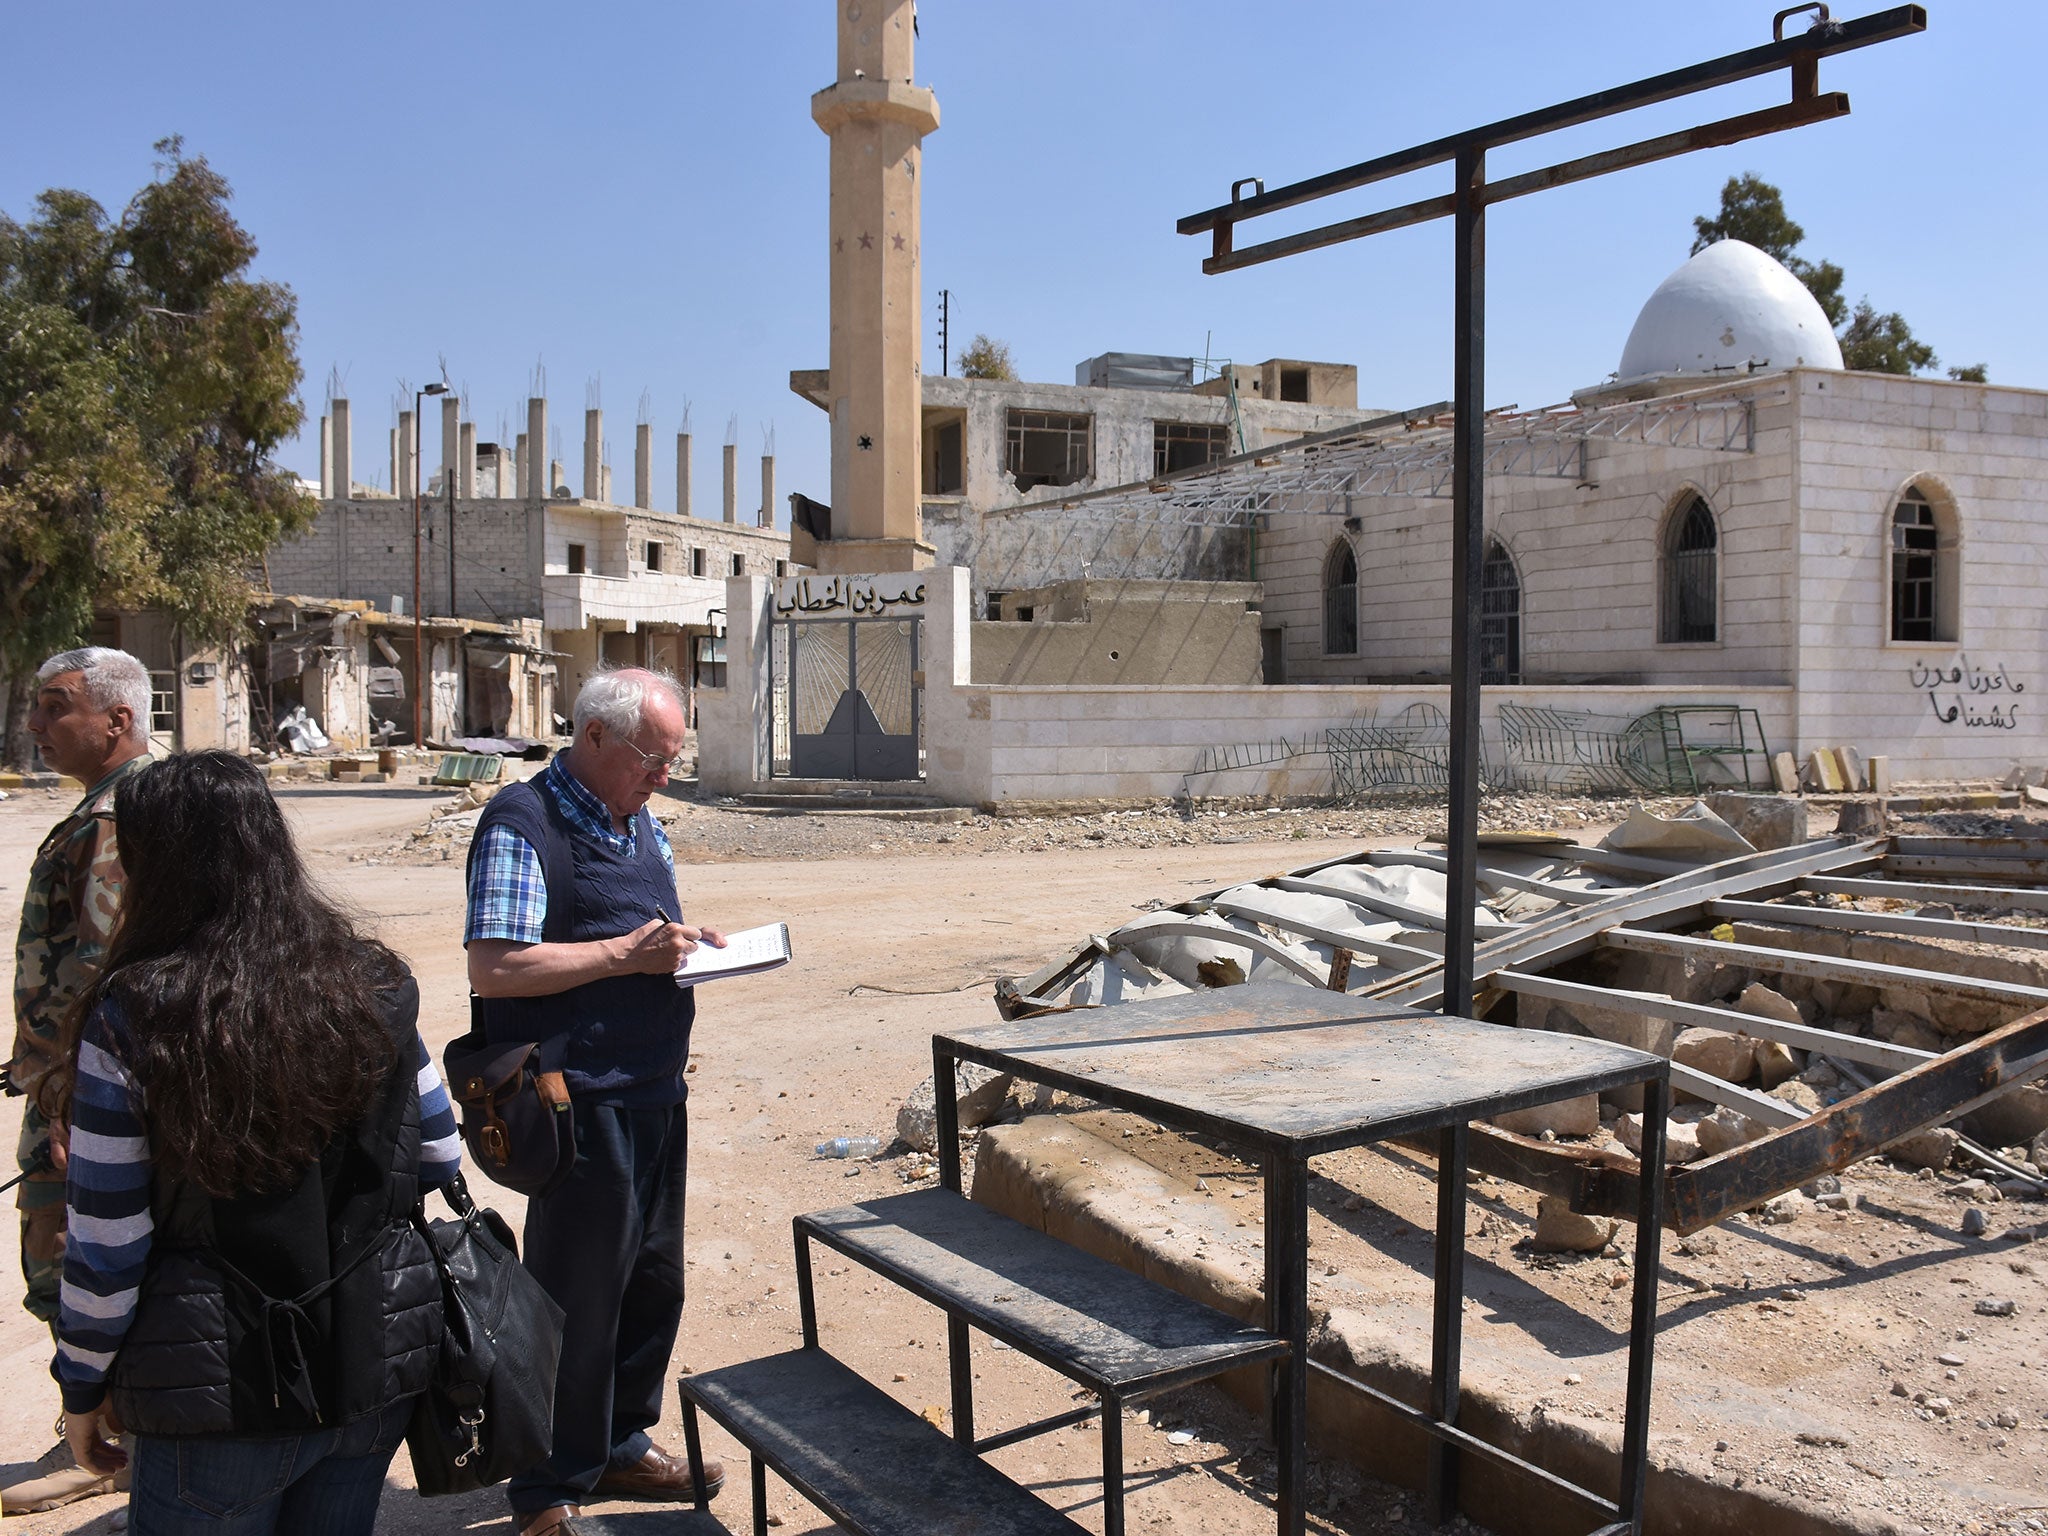 Robert Fisk reports from the front line in Tader, Syria